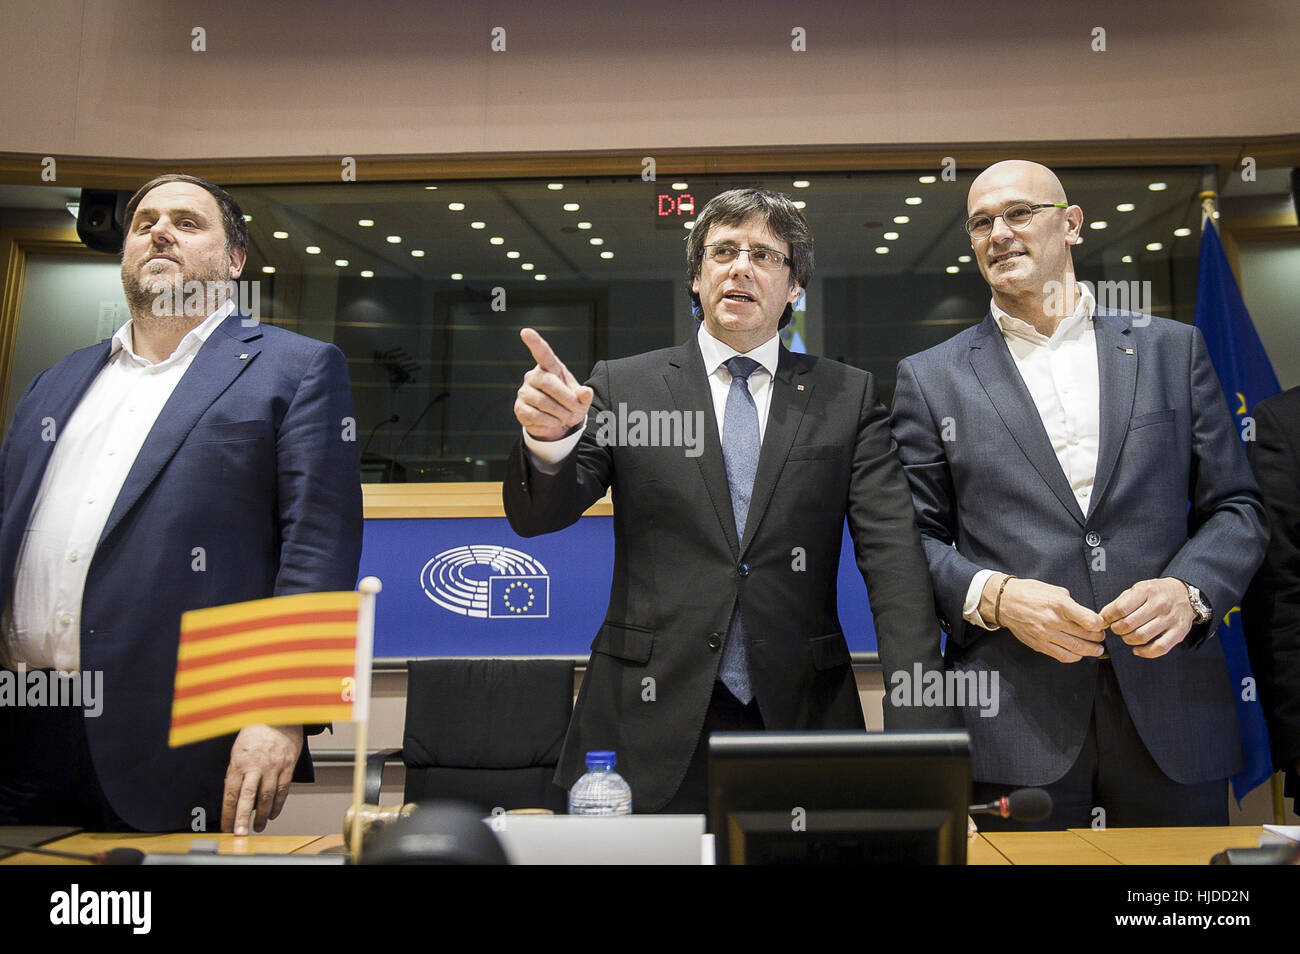 Oriol Janqueras Vice President of the Catalan government of Economy and Treasury (L), Carles Puigdemont President of the Catalan government (C) and Raul Romeva Catlan minister of Foreign Affairs and Transparency take part in the conference on The Catalan Independence Referendum at European Parliament headquarters in Brussels, Belgium on 24.01.2017 by Wiktor Dabkowski | usage worldwide Stock Photo